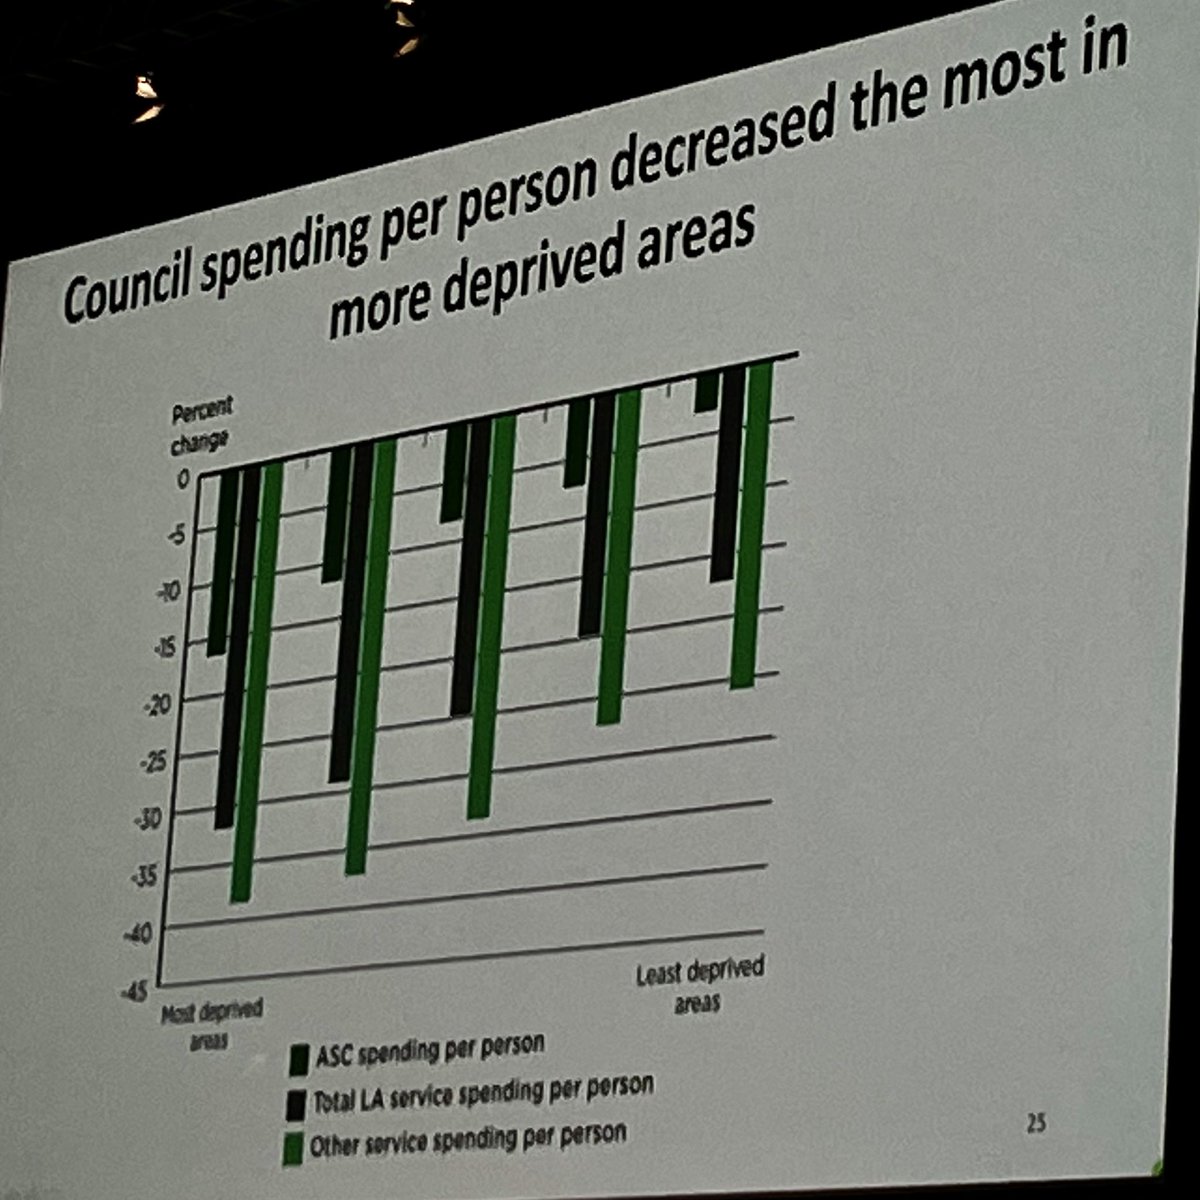 In contrast to ‘Levelling up’ rhetoric, @MichaelMarmot outlines how UK govt policy has made poor people poorer…
#rcgpac #woncaeurope2022